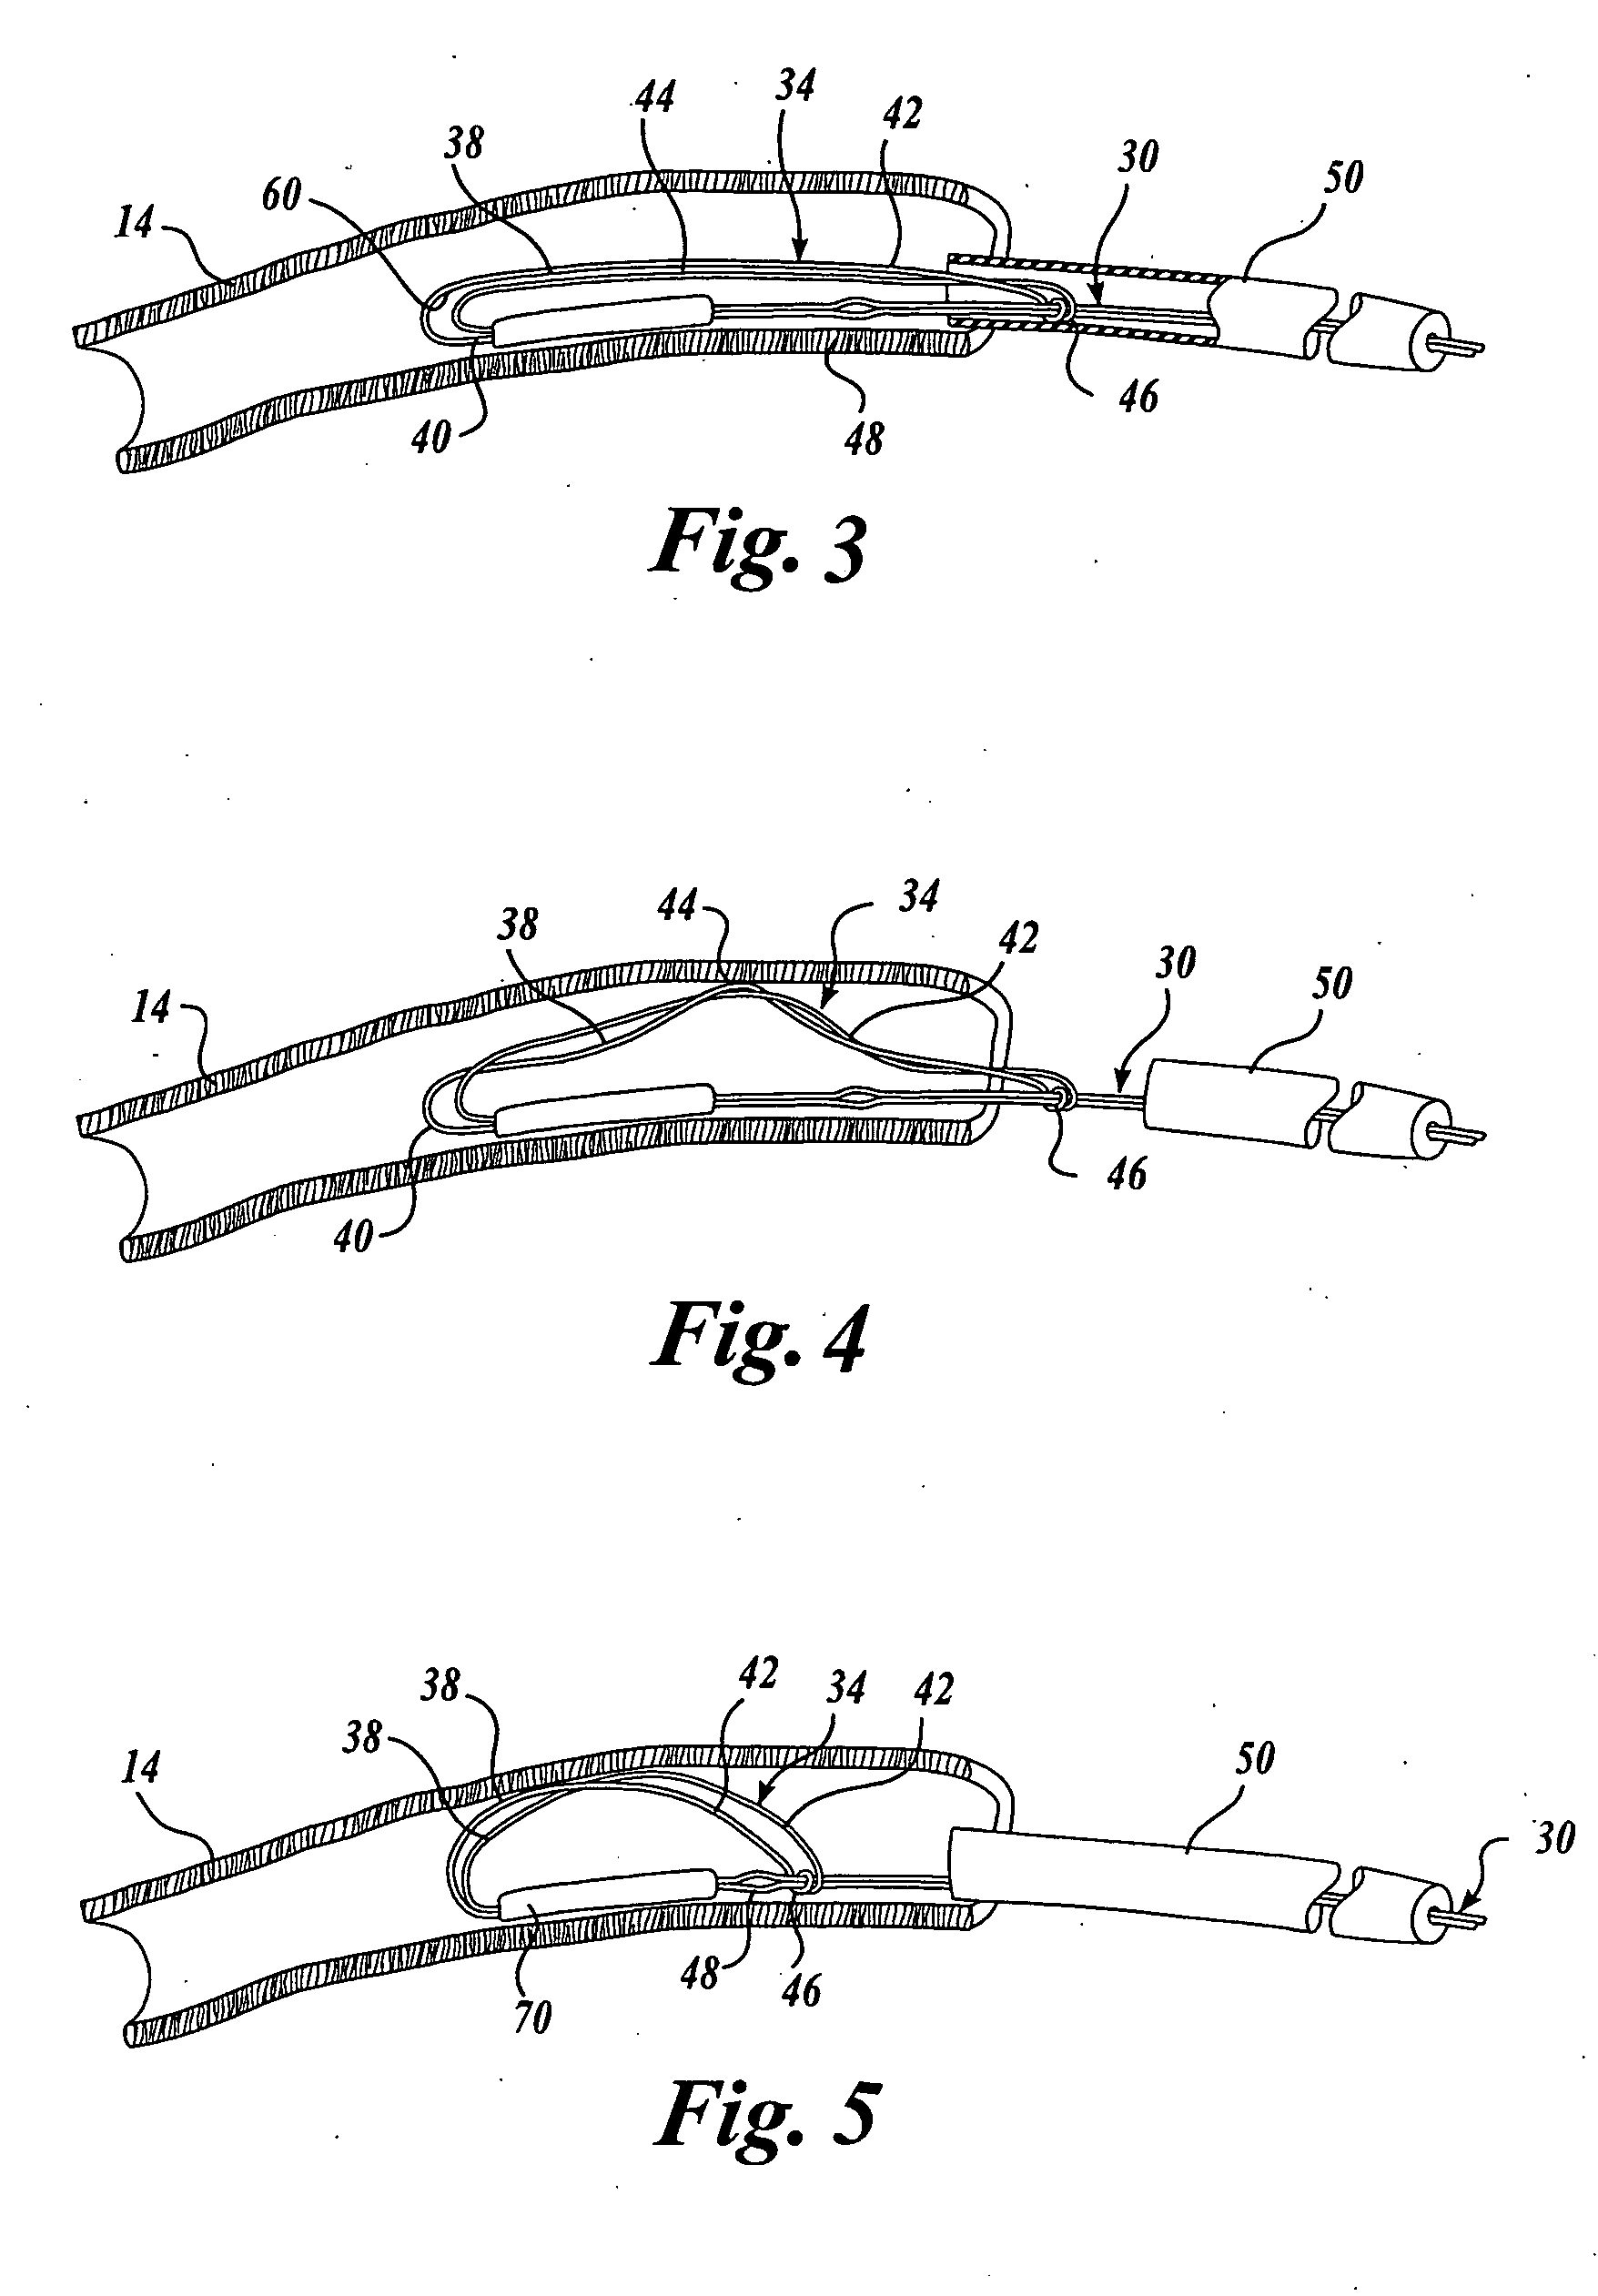 Body lumen device anchor, device and assembly